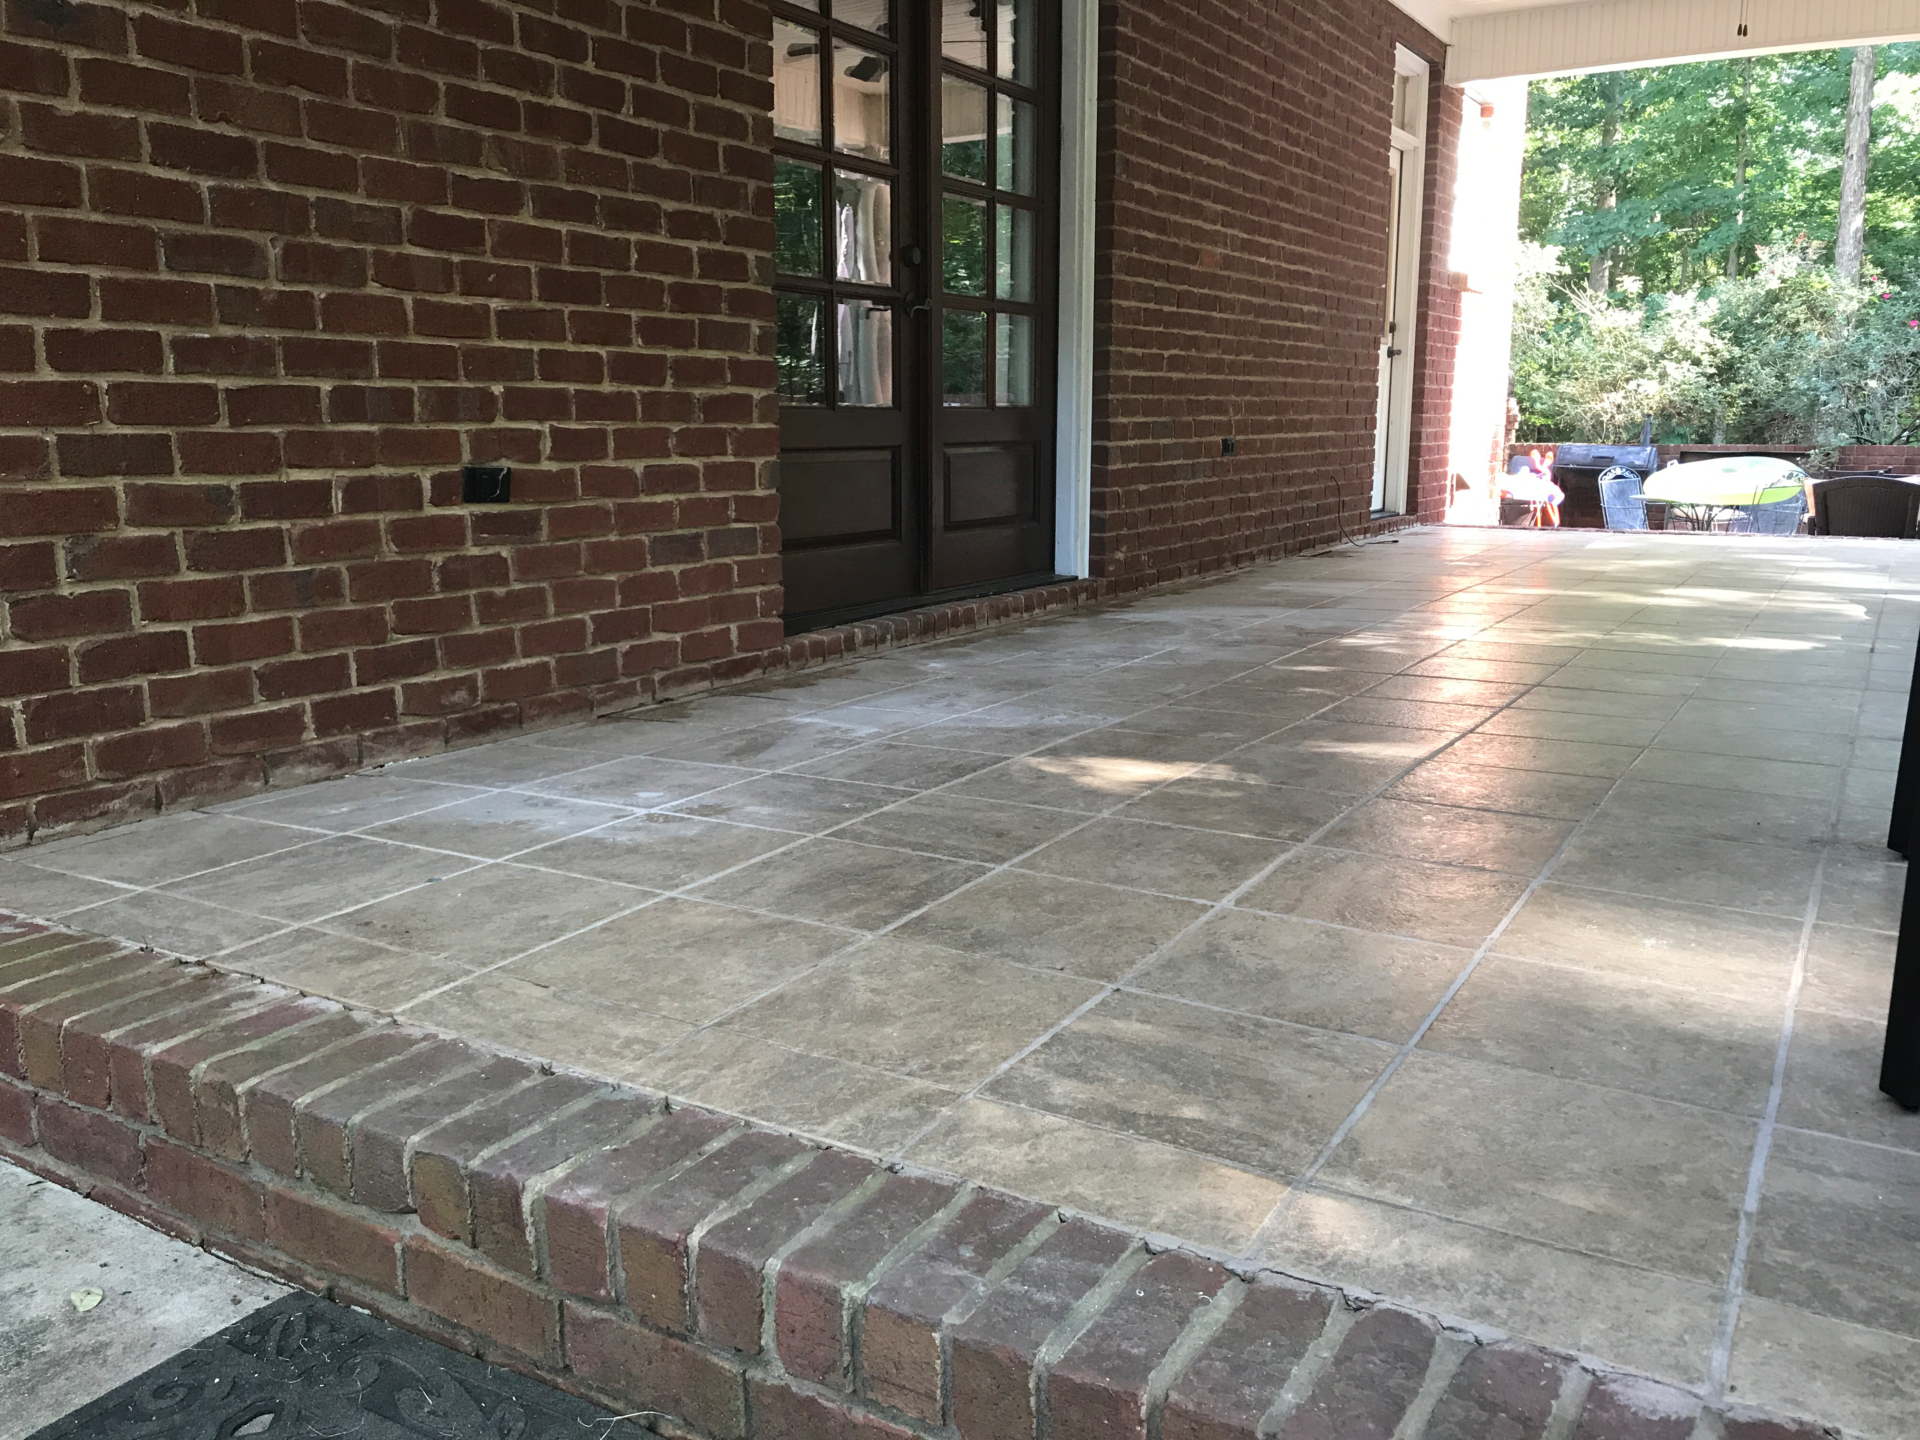 Concrete patio with tile and brick - after